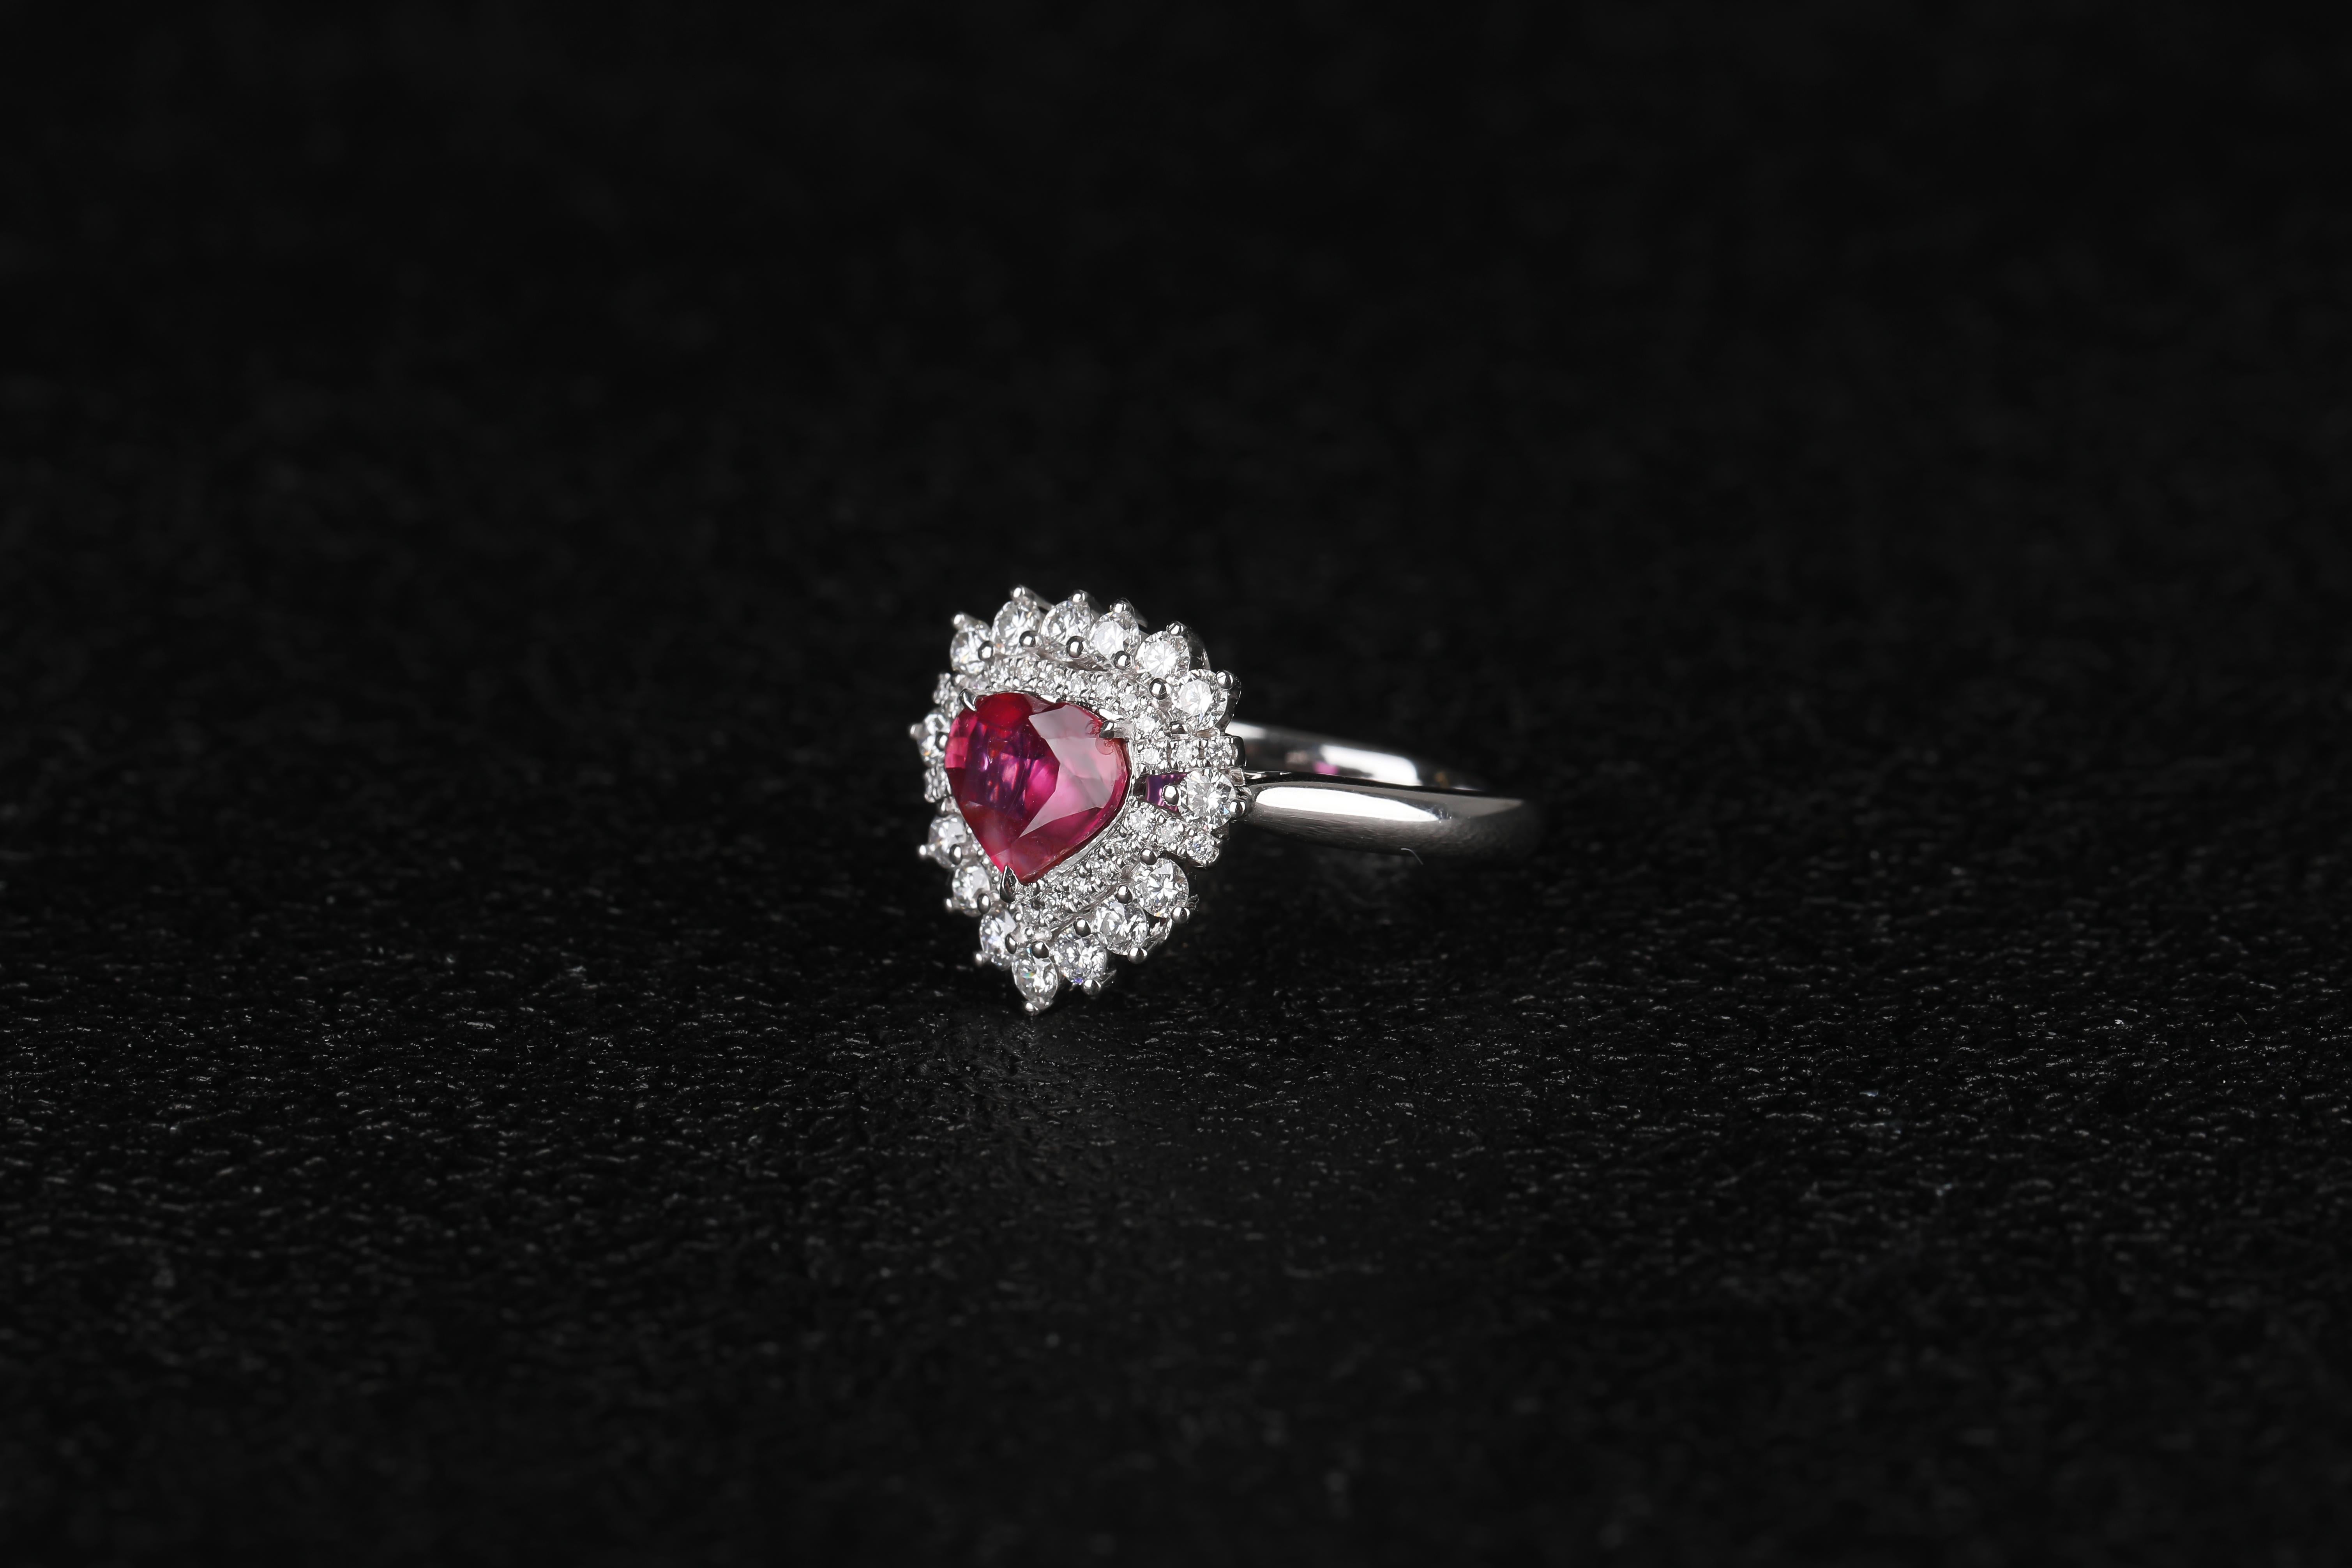 This is a heart shape ruby cluster ring.  The ruby is currounded by circles of diamonds, with the inner circle consists of smalle dianonds and the outer layer with significantly larger diamonds. It is a cute design as suited younger generation. It